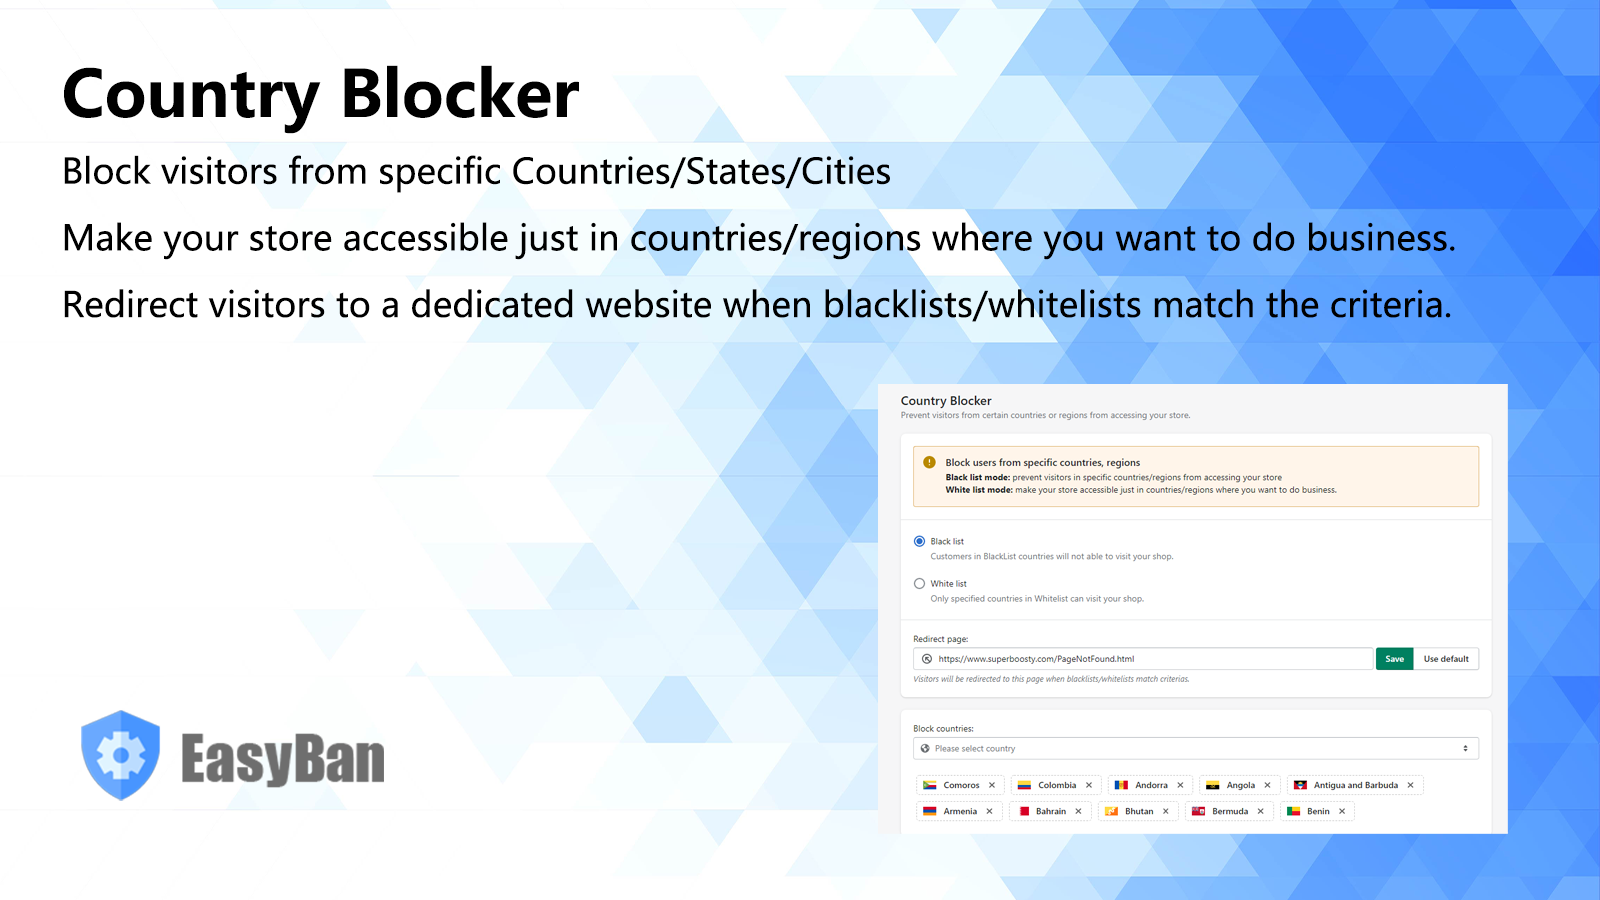 Block visitors by Specific Countries/Regions